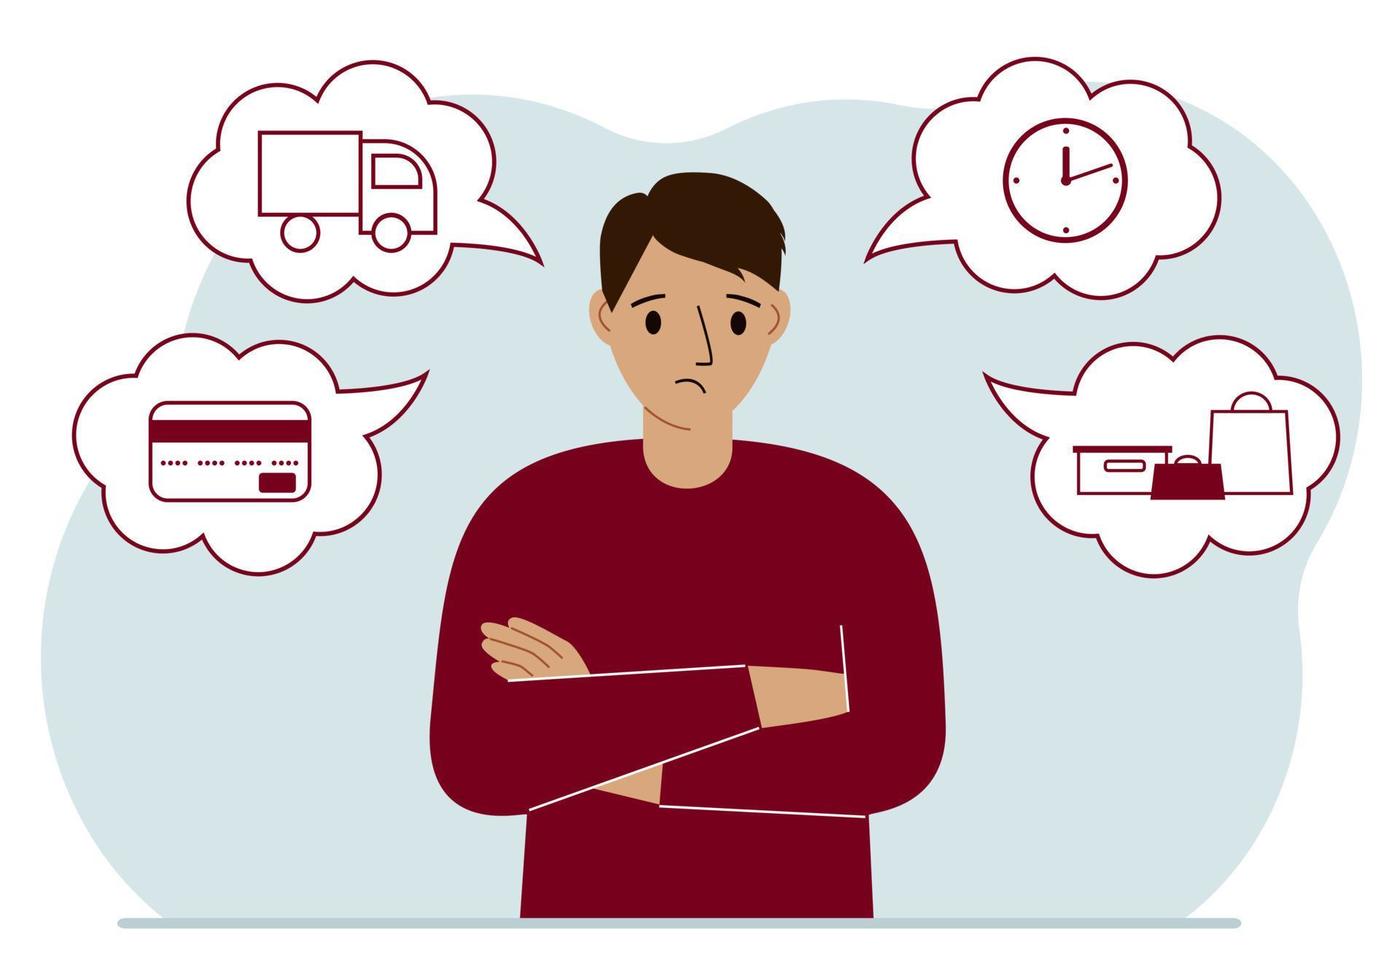 Ordering and delivery process concepts. Sad man and steps of a delivery order. Payment, delivery car, waiting hours and goods and purchases. Vector flat illustration